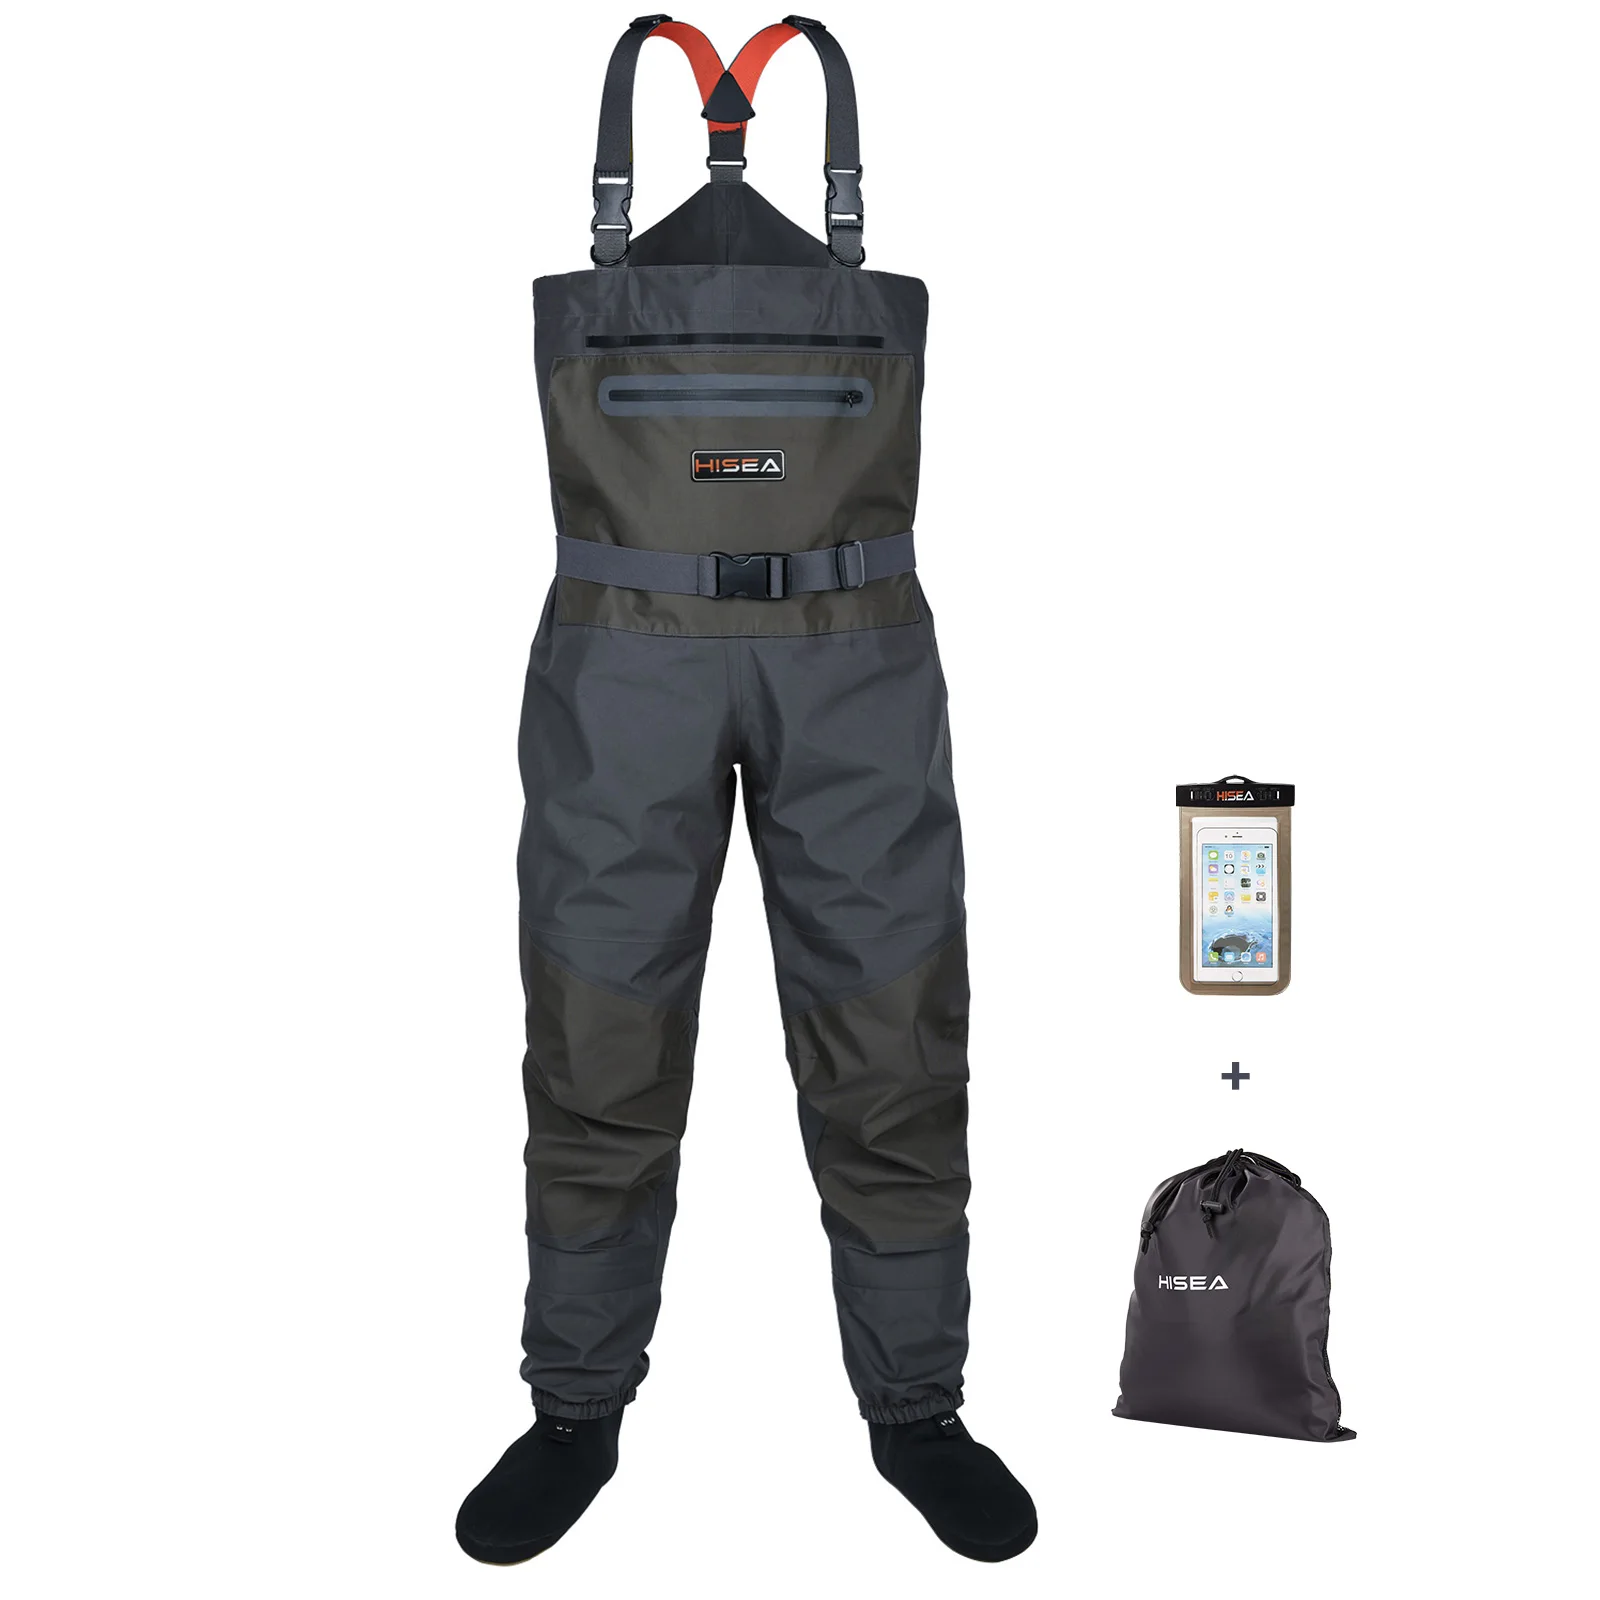 Hisea Fly Fishing Chest Waders Breathable Stocking Foot Wader with Boots for Men Women